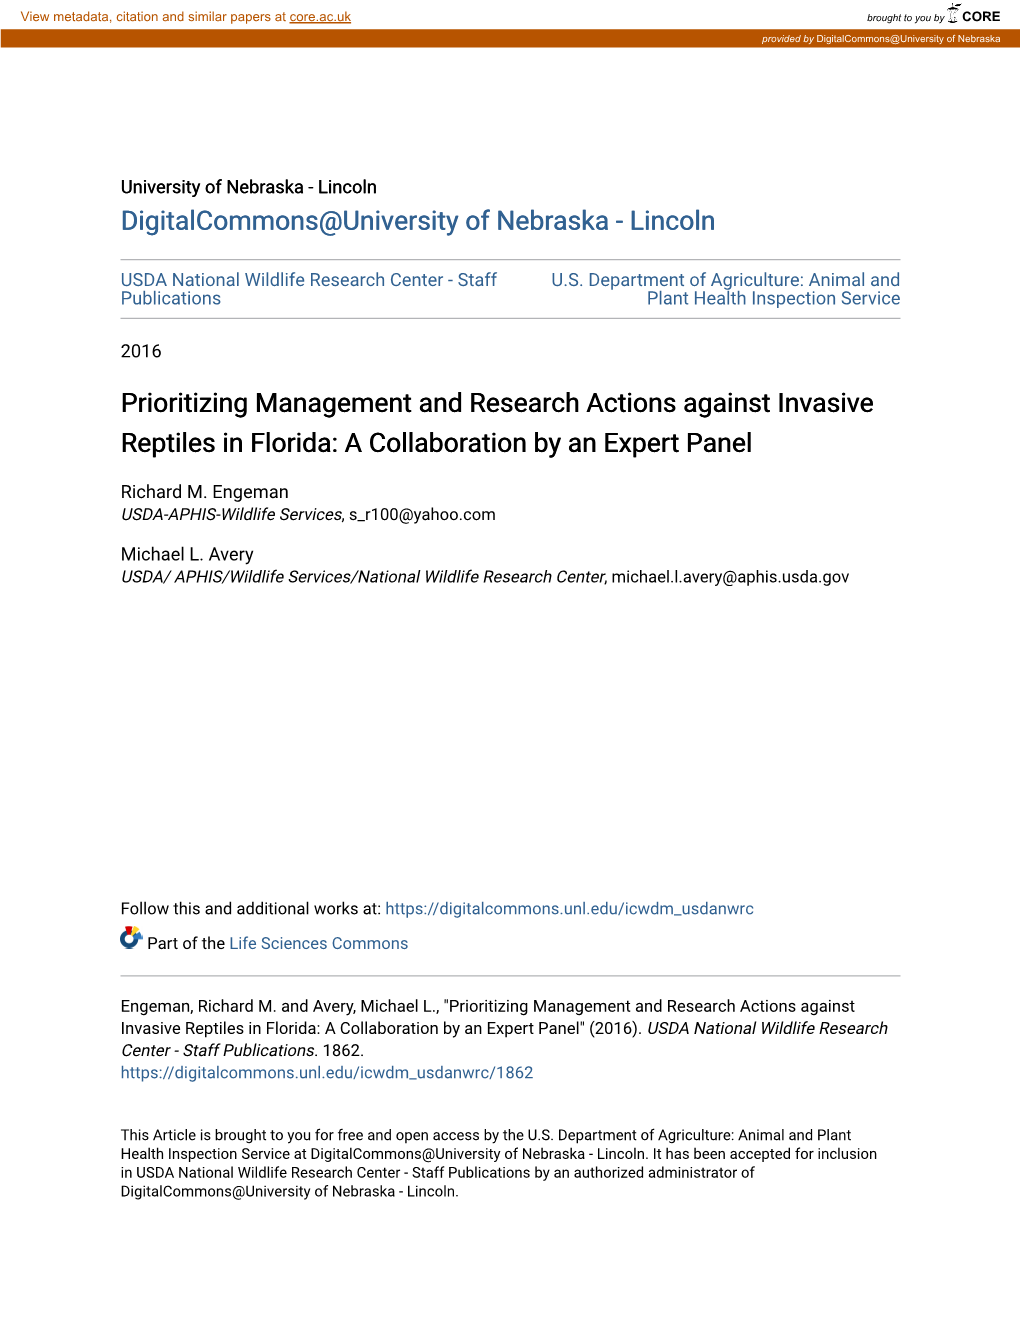 Prioritizing Management and Research Actions Against Invasive Reptiles in Florida: a Collaboration by an Expert Panel